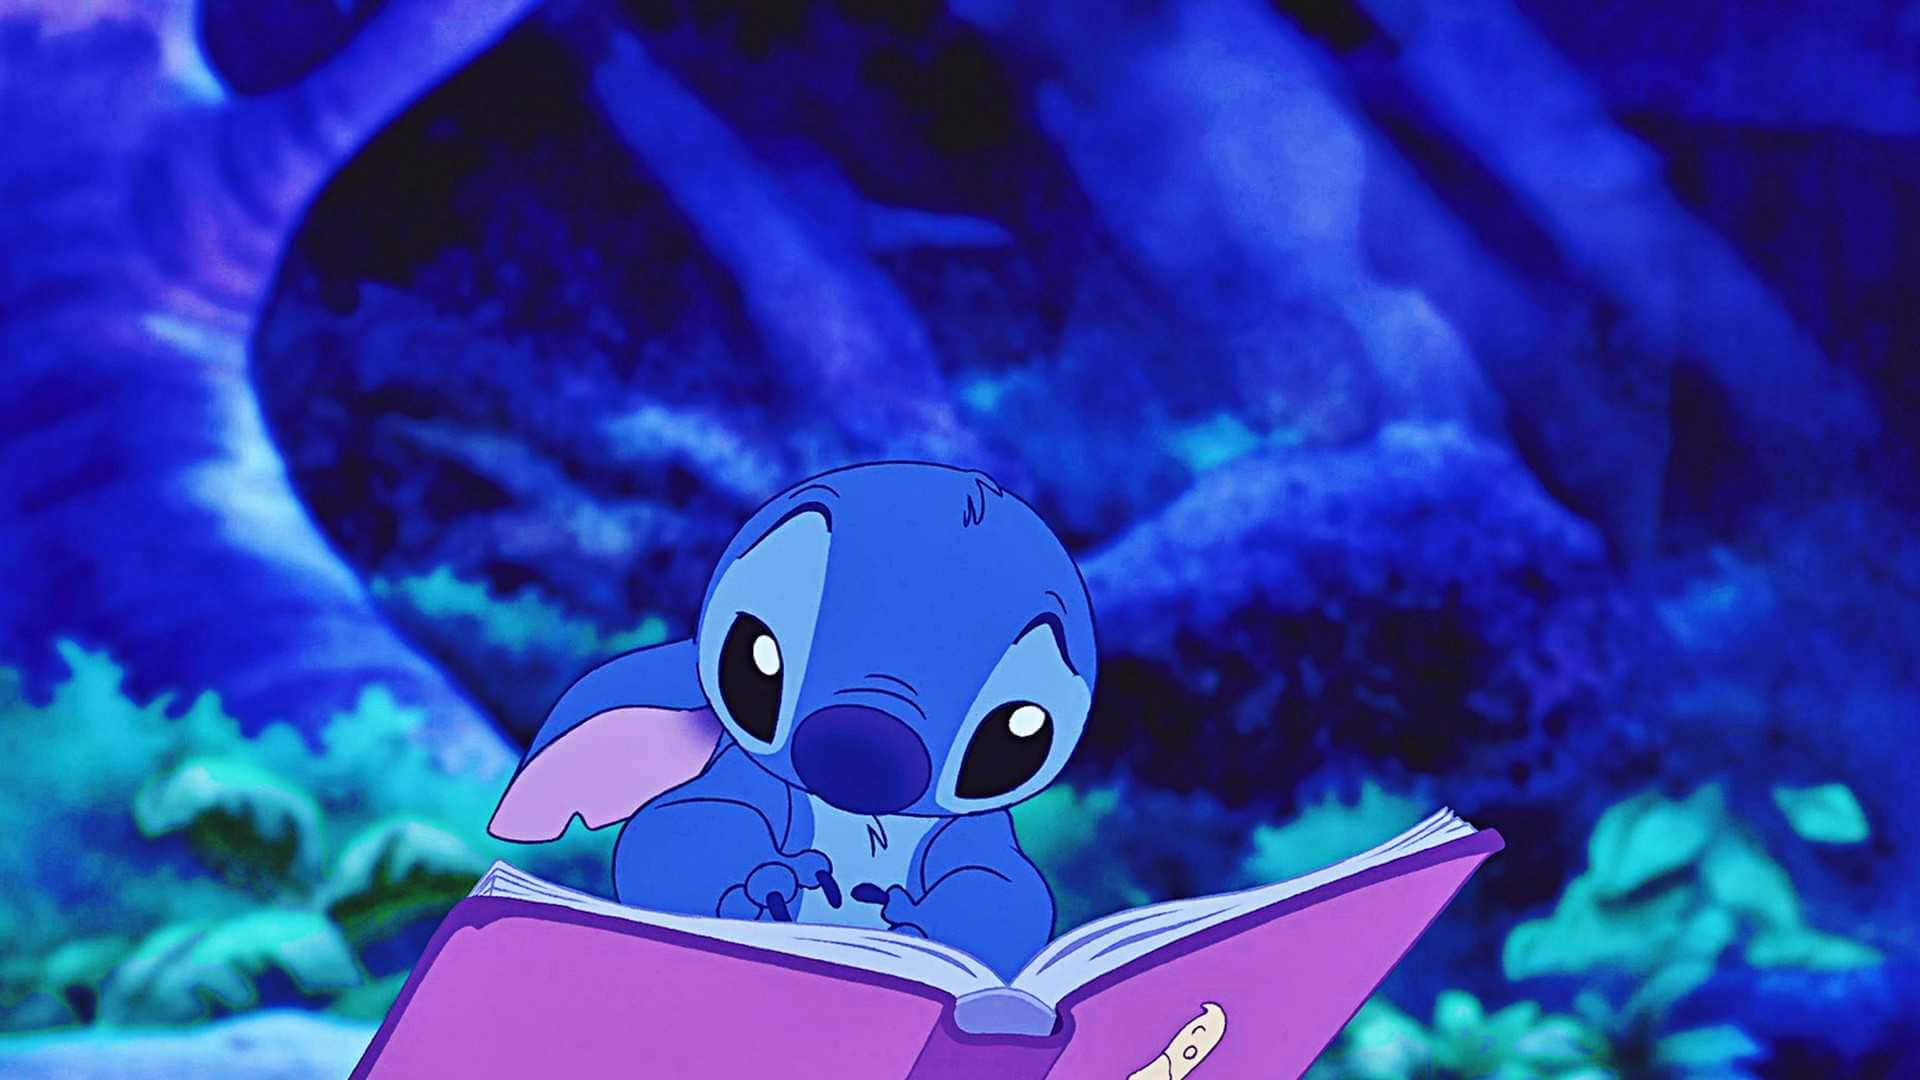 "Experience the power of computing with Stitch!" Wallpaper